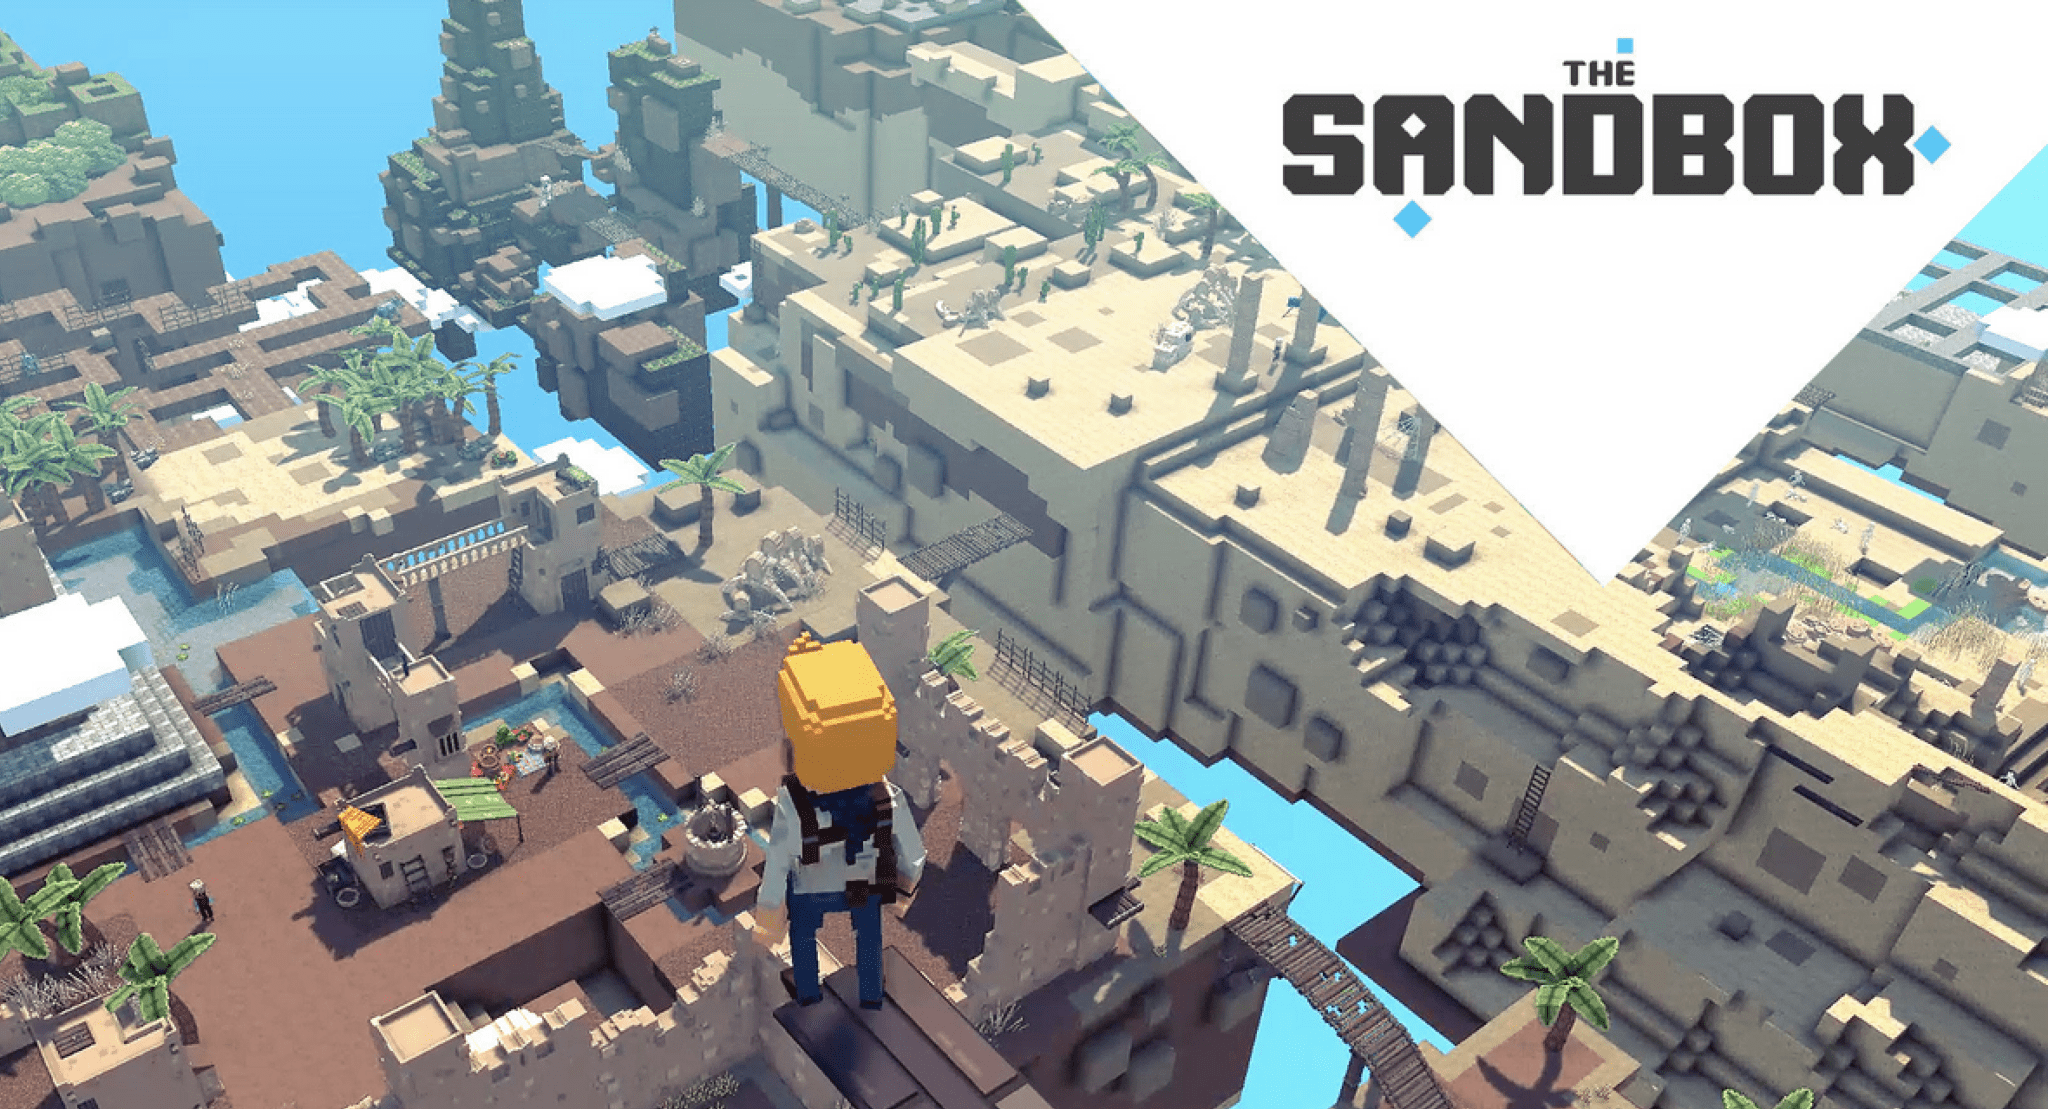 The Sandbox Review: The Most Attractive Metaverse World Right Now